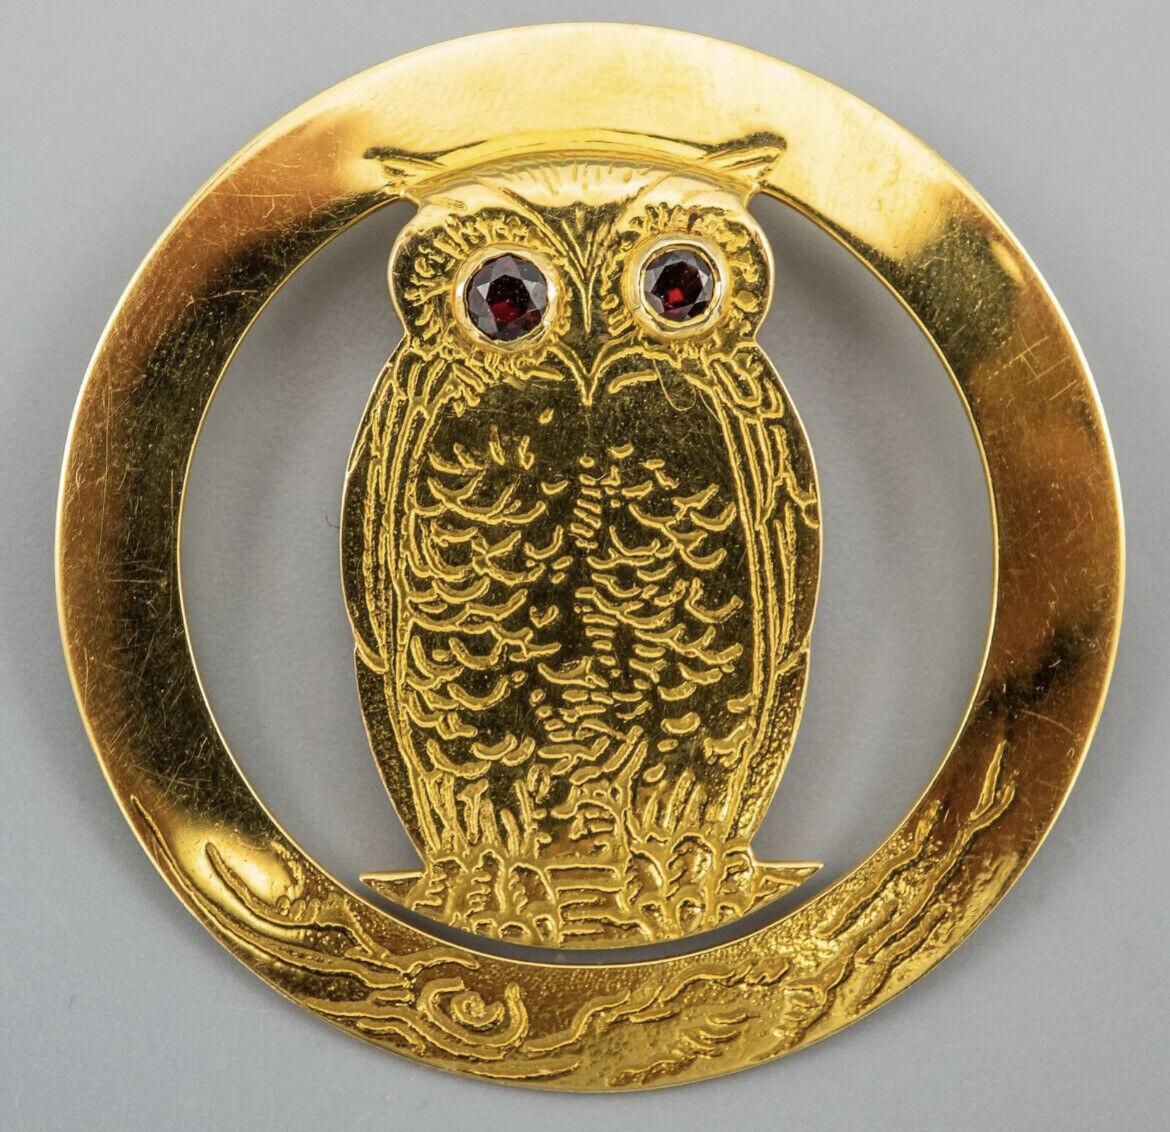 Antique Circa 1900s Tiffany & Co. 18k Yellow Gold & Garnet Owl Pendant

Here is your chance to purchase a beautiful and highly collectible designer pendant.  Truly a great piece at a great price! 

Marked:  Tiffany & Co Makers 17373 18K